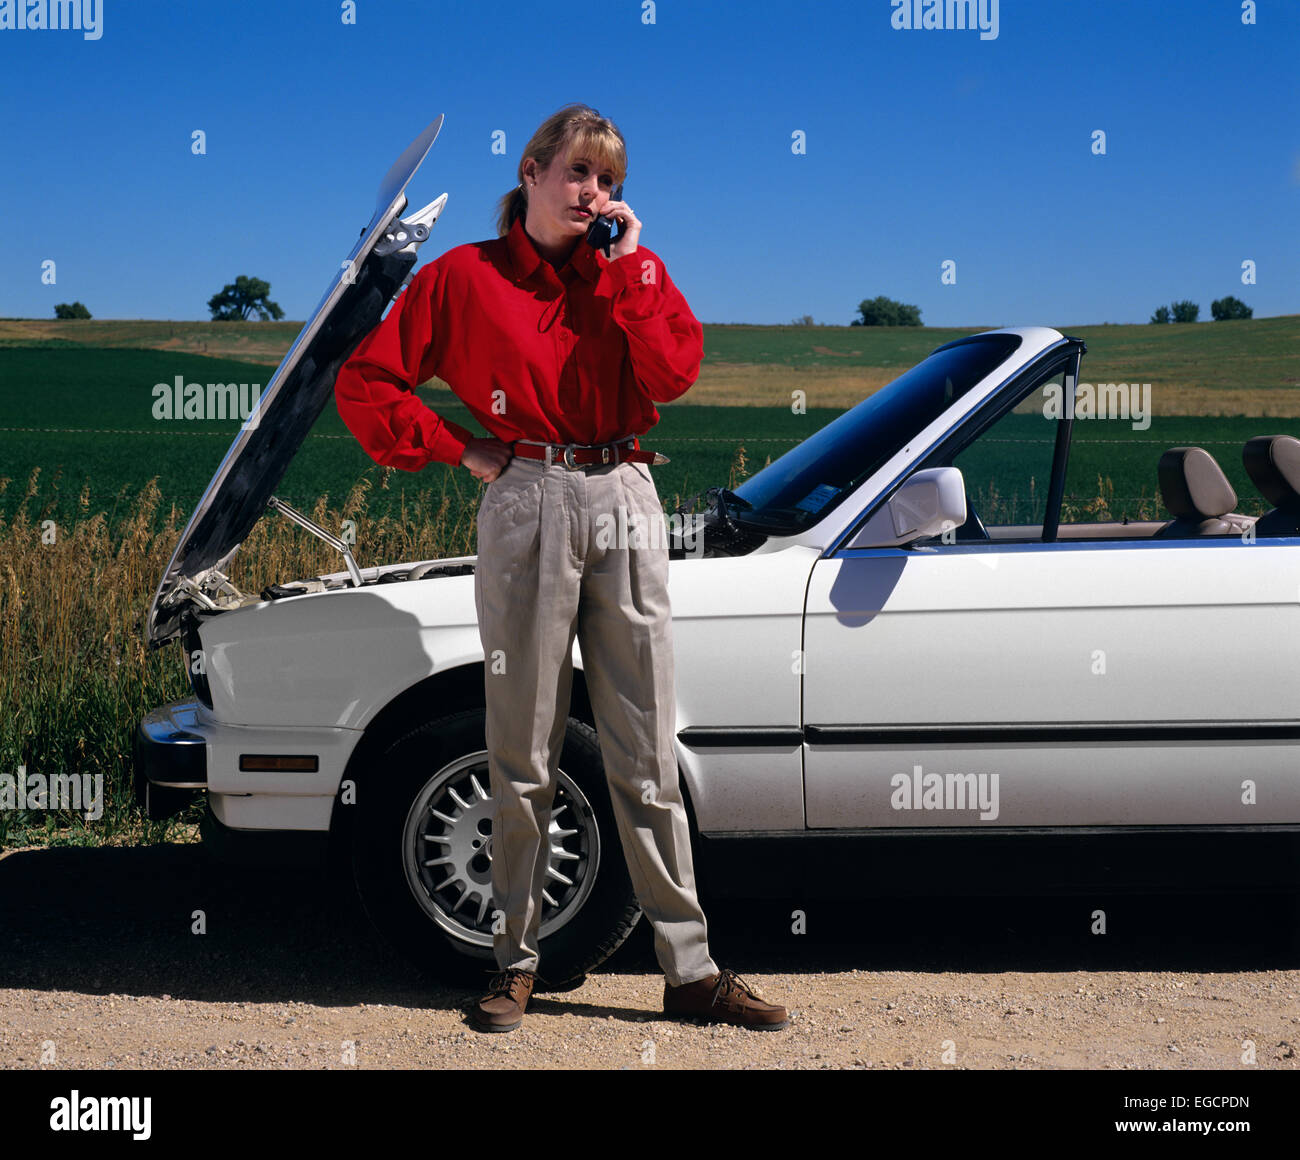 1990s WOMAN WITH CAR TROUBLE SPEAKING REQUESTING ASSISTANCE ON OLDER CELLULAR MOBILE PHONE Stock Photo